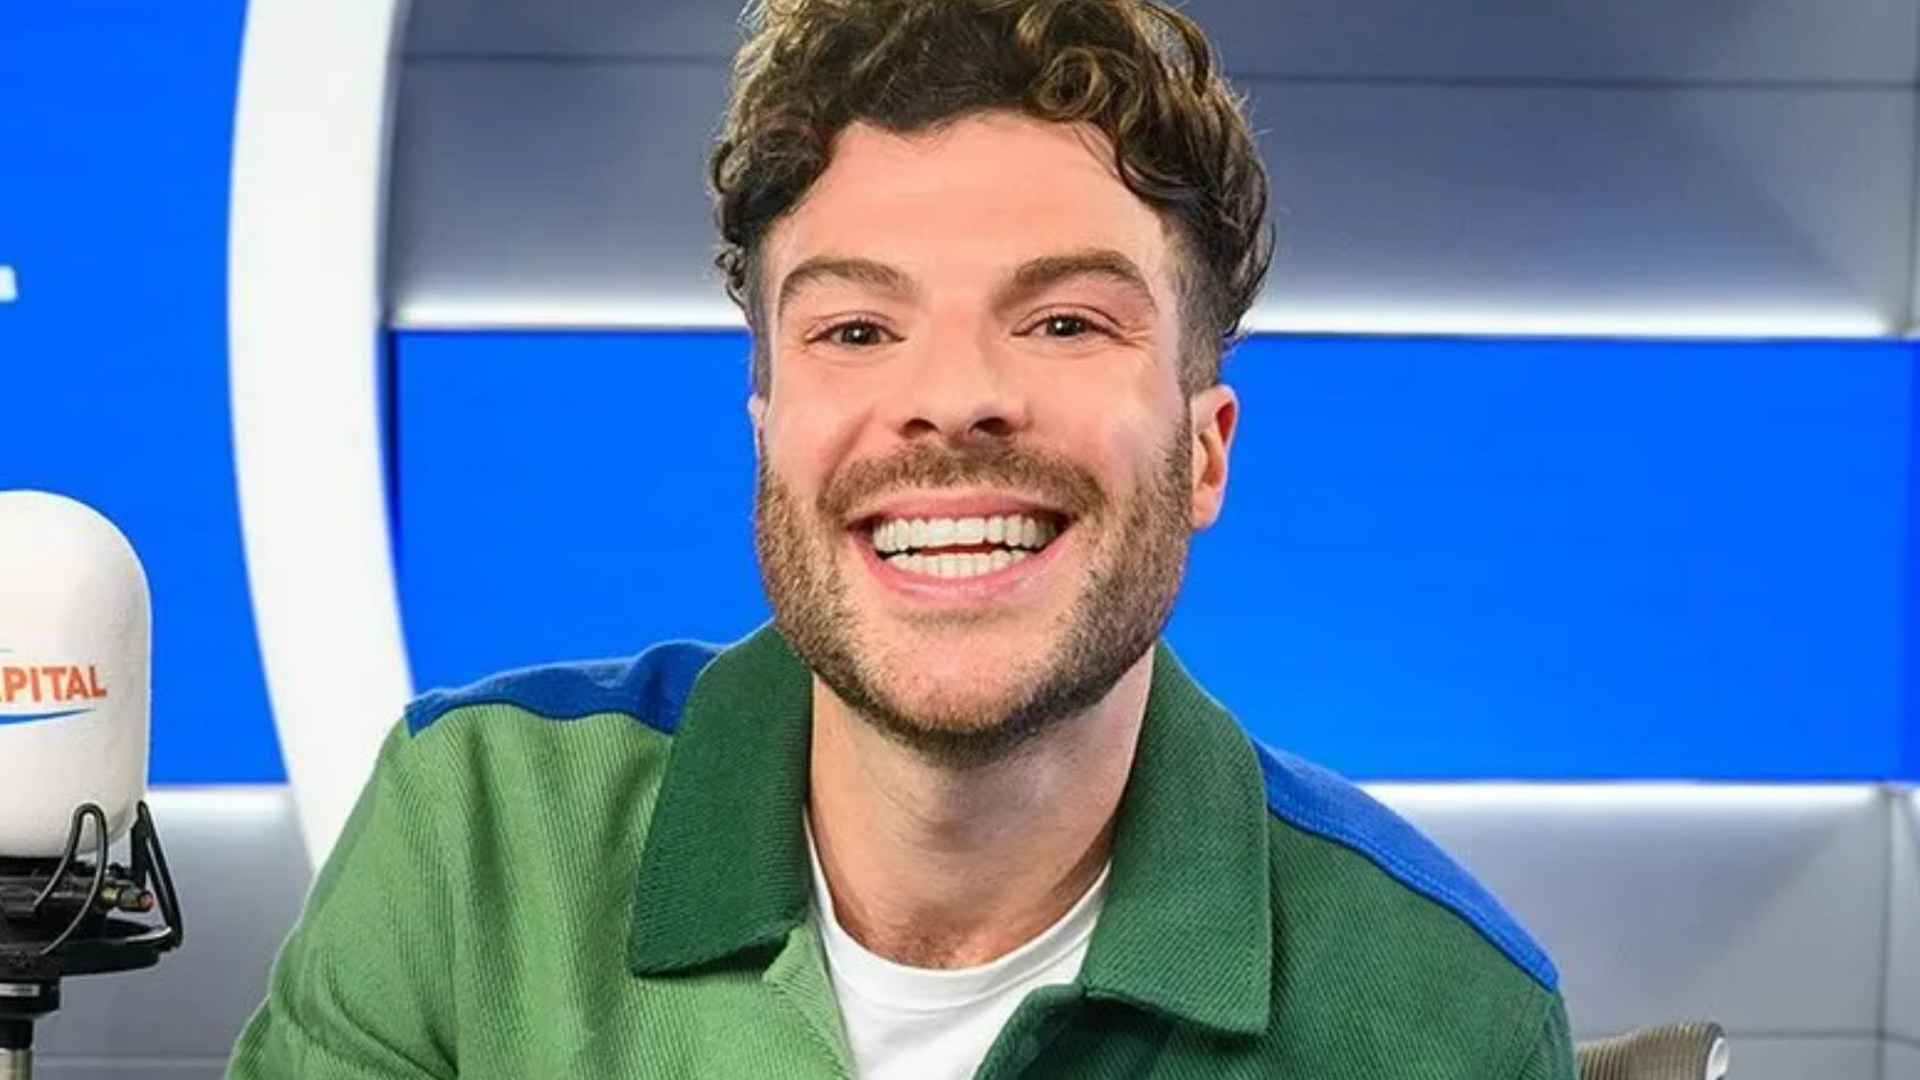 Jordan North finally confirms he’s replacing Roman Kemp in new Capital radio job – and reveals who his co-hosts will be [Video]